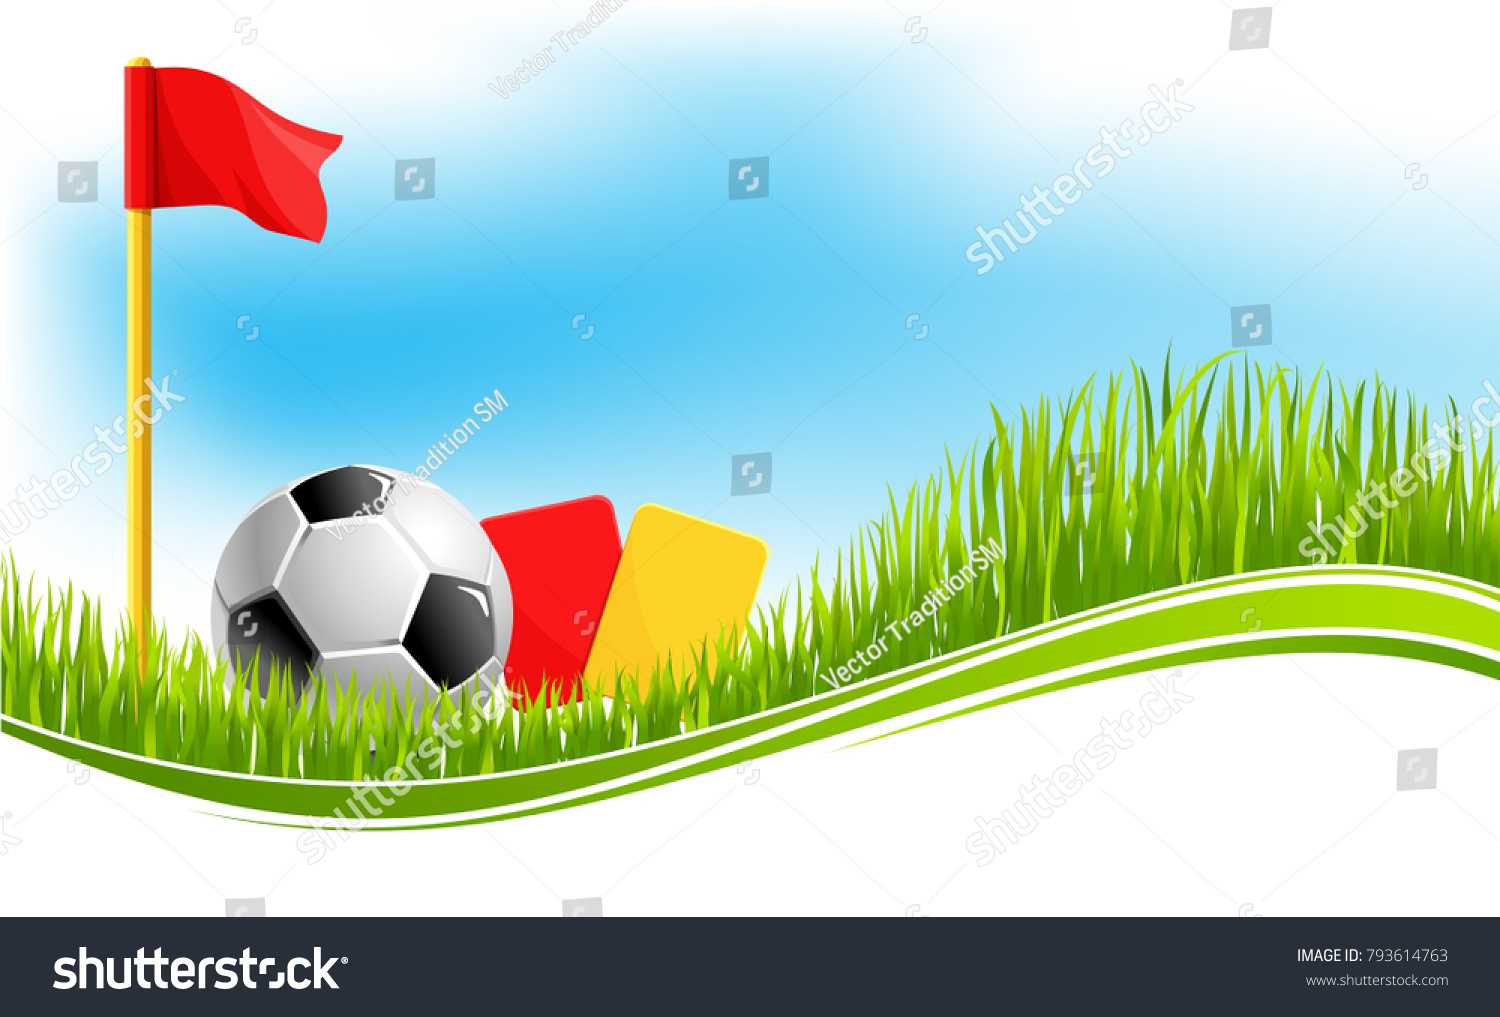 Soccer Football Game Background Design Template Stock Vector Intended For Football Referee Game Card Template